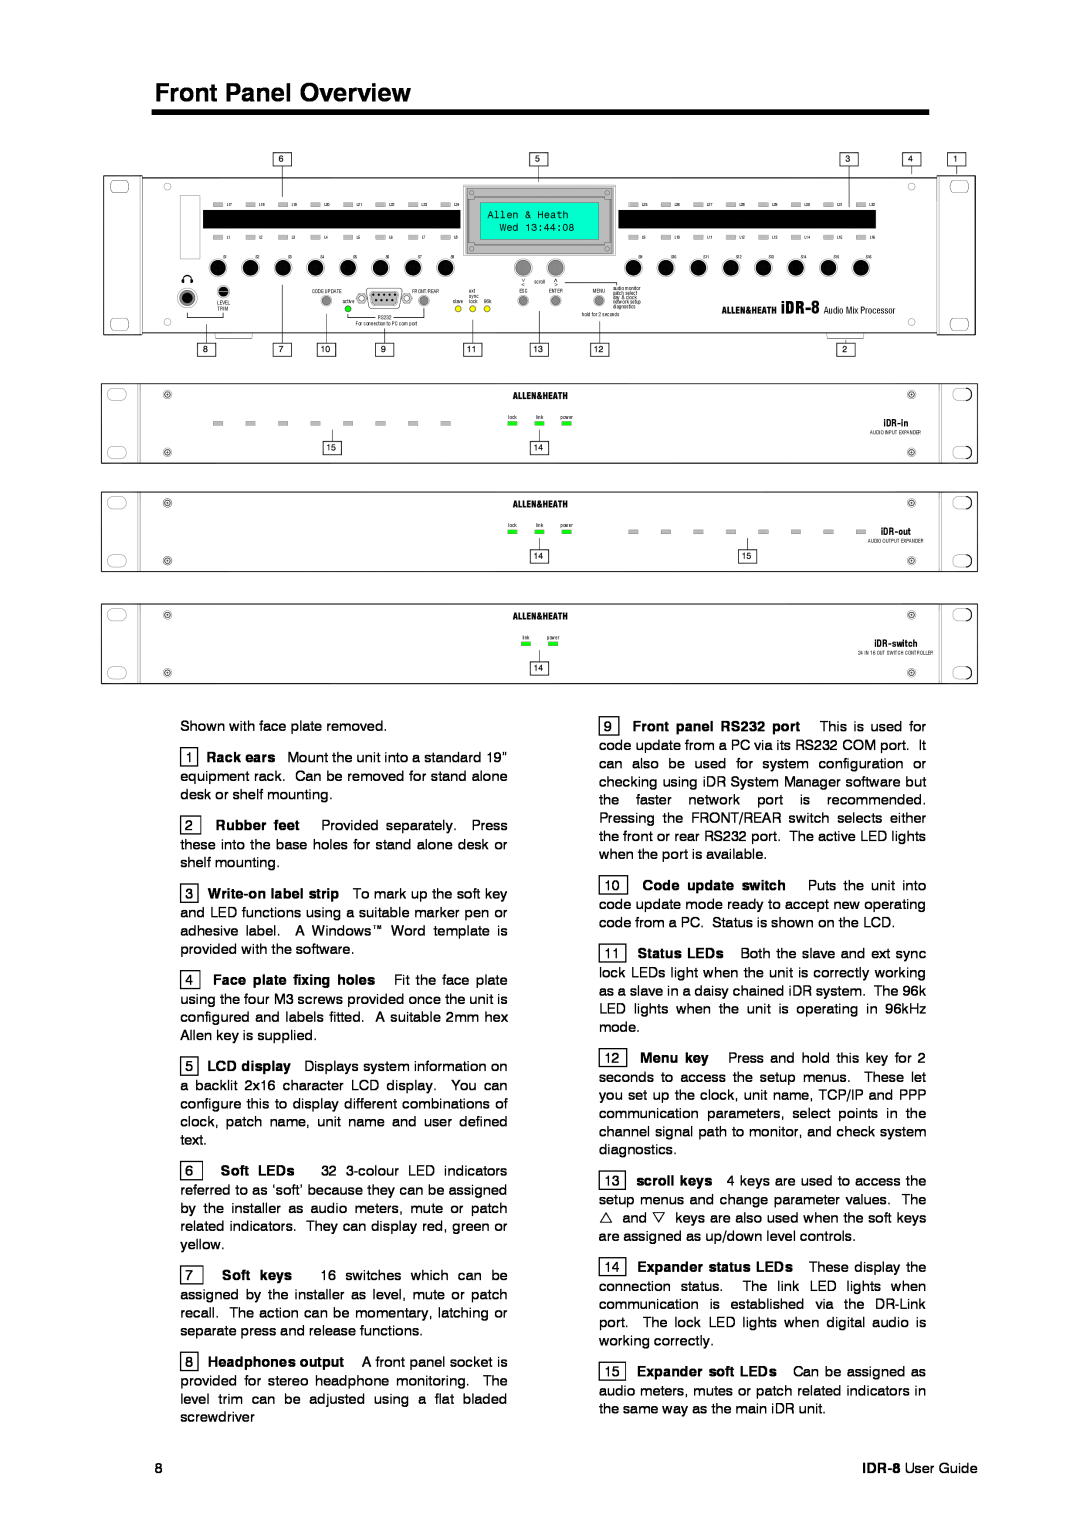 Compex Systems AP4530 manual Front Panel Overview, Front panel RS232 port This is used for 